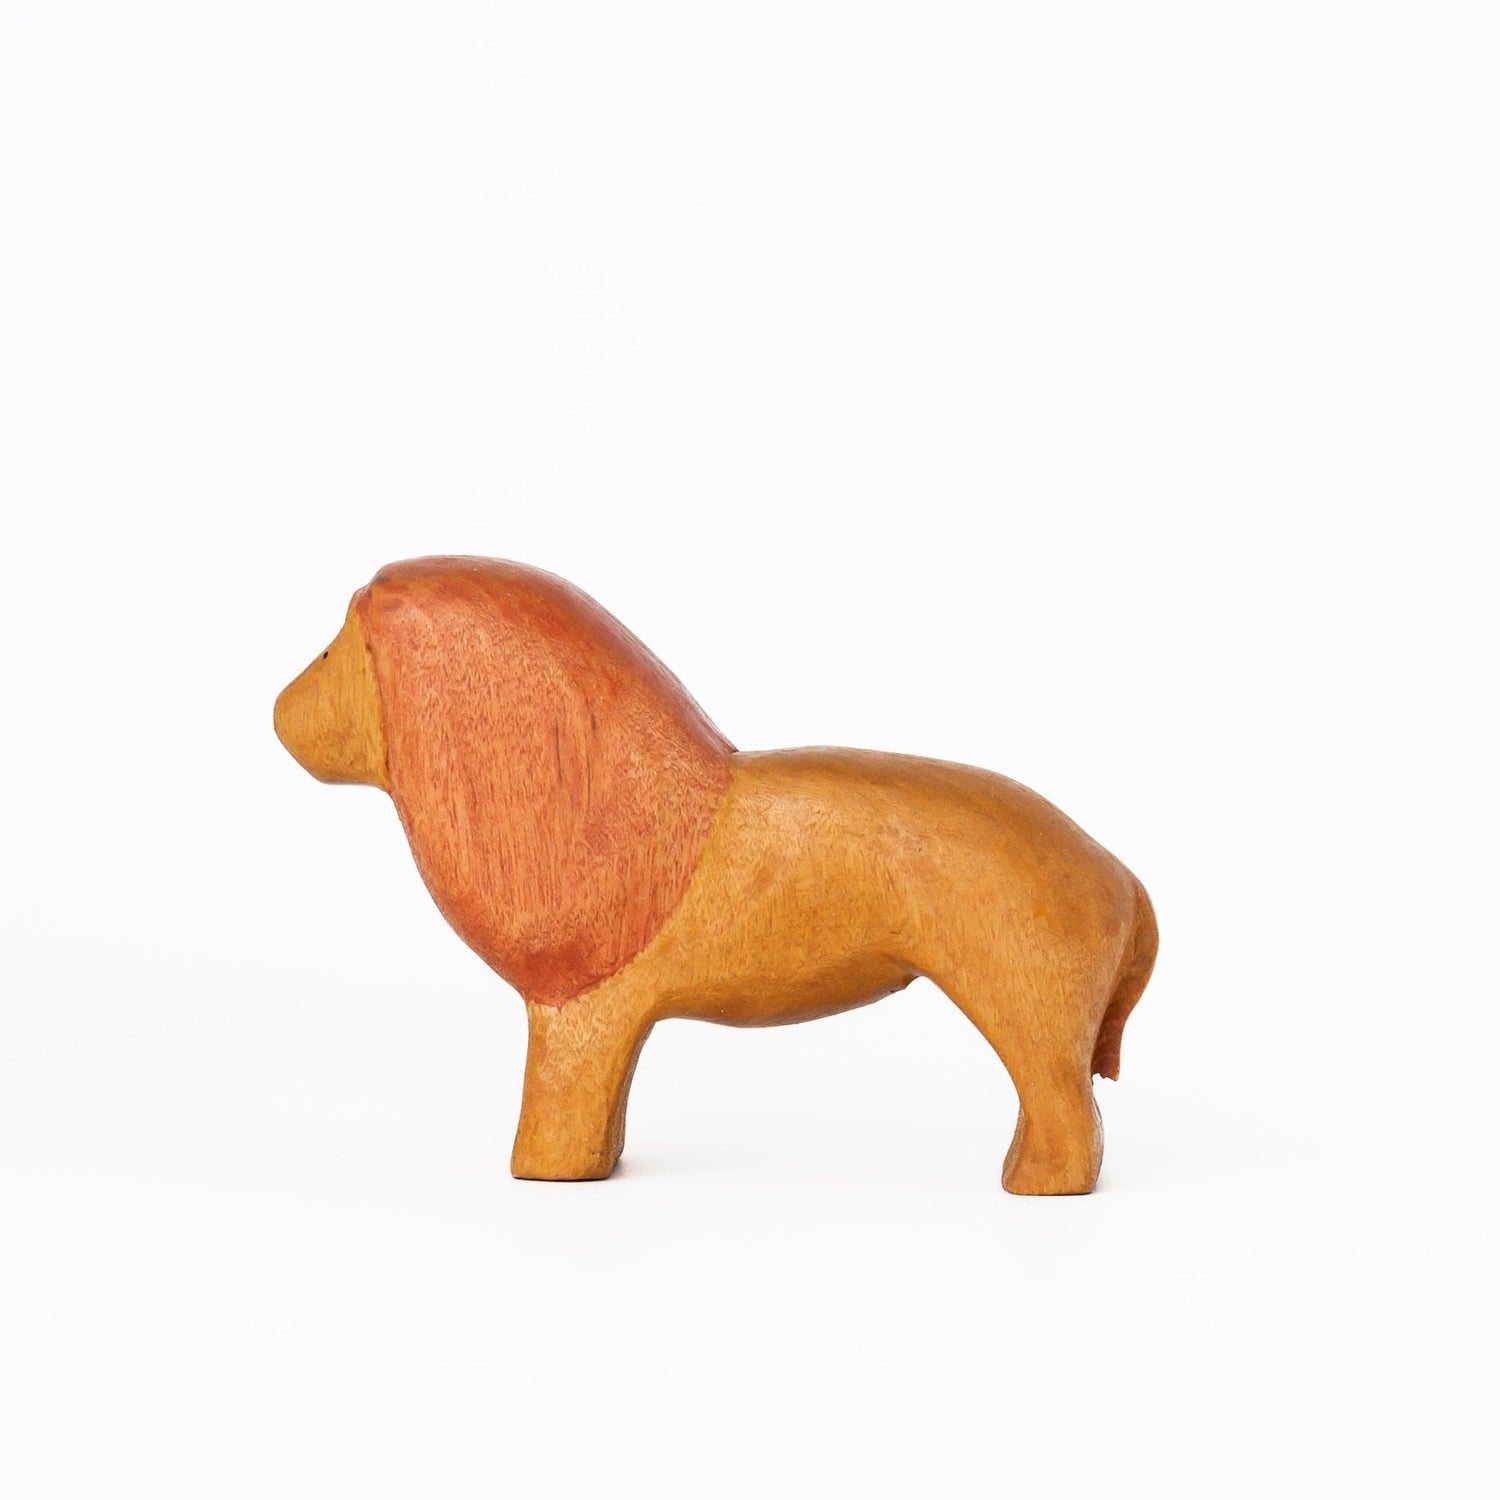 Bumbleberry Toys Wooden Animals "Leonidas Lion" Wooden Animal Toy (Handmade in Canada)